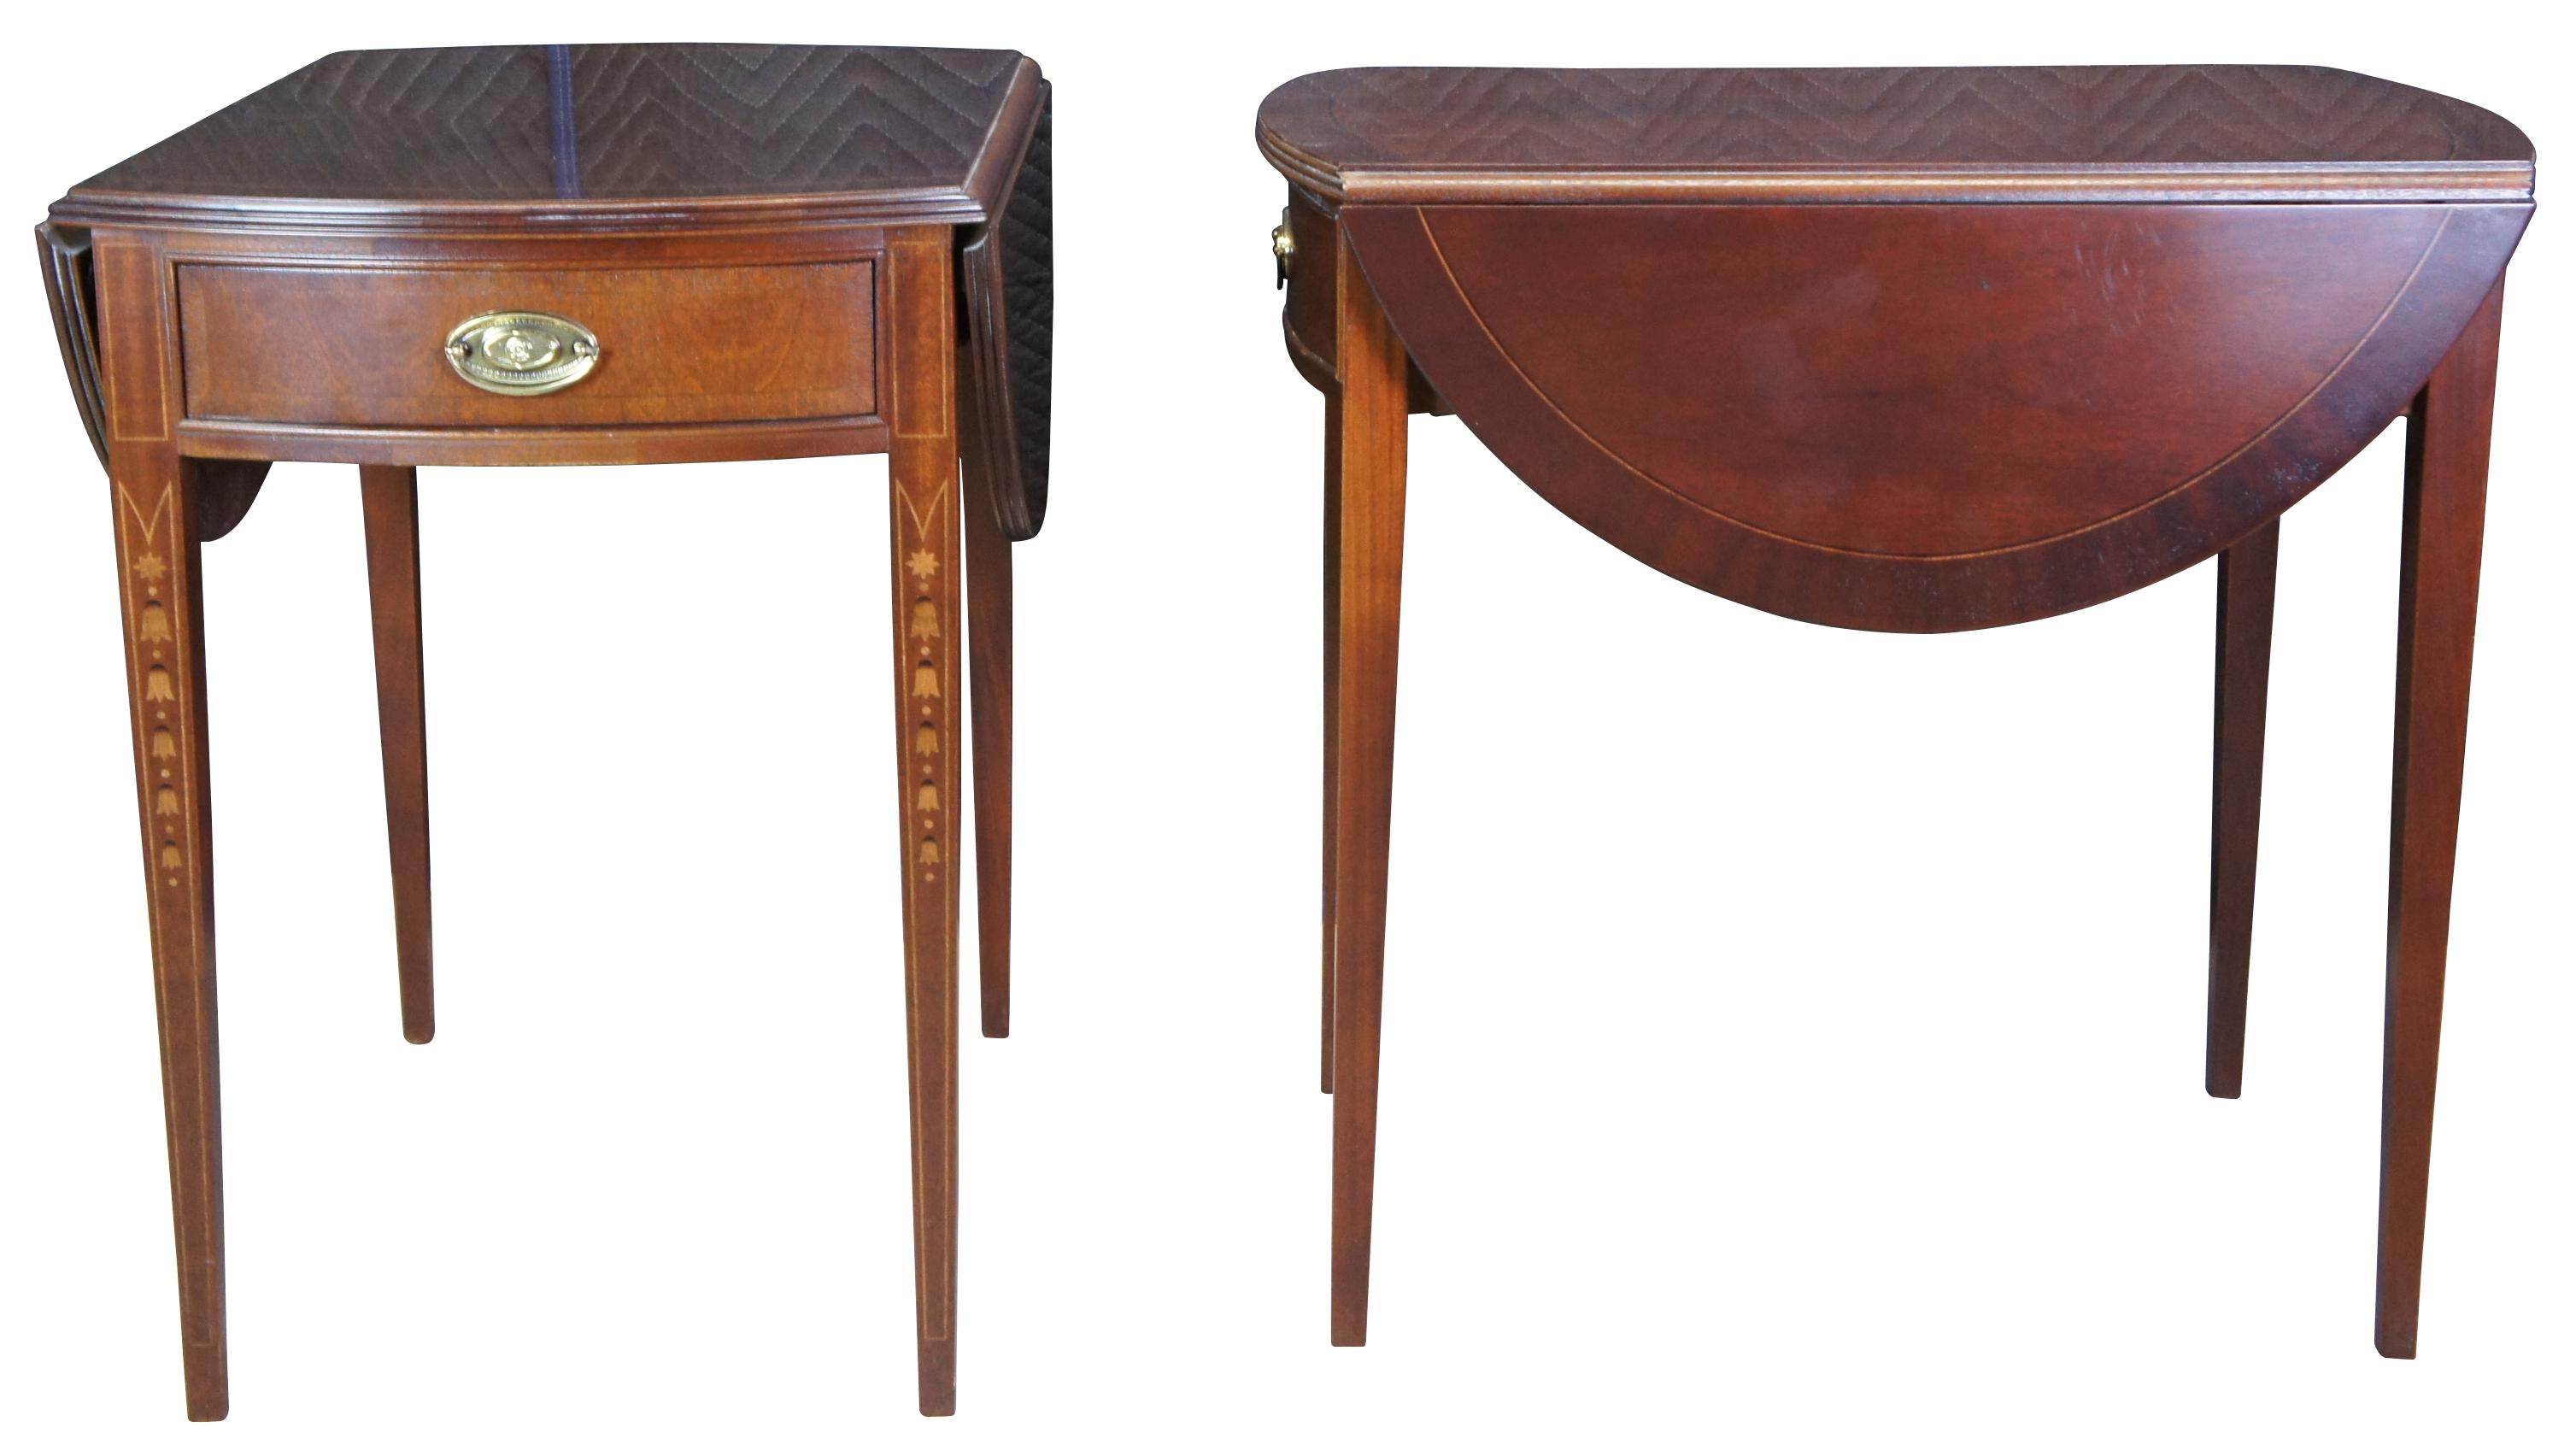 Pair of American Made Ethan Allen 18th century pembroke side tables, 22-8504. Made from mahogany with drop leafs that open to create an ovular surface. Features banding over square tapered legs, inlay, dovetailed drawers and brass hardware. Inspired